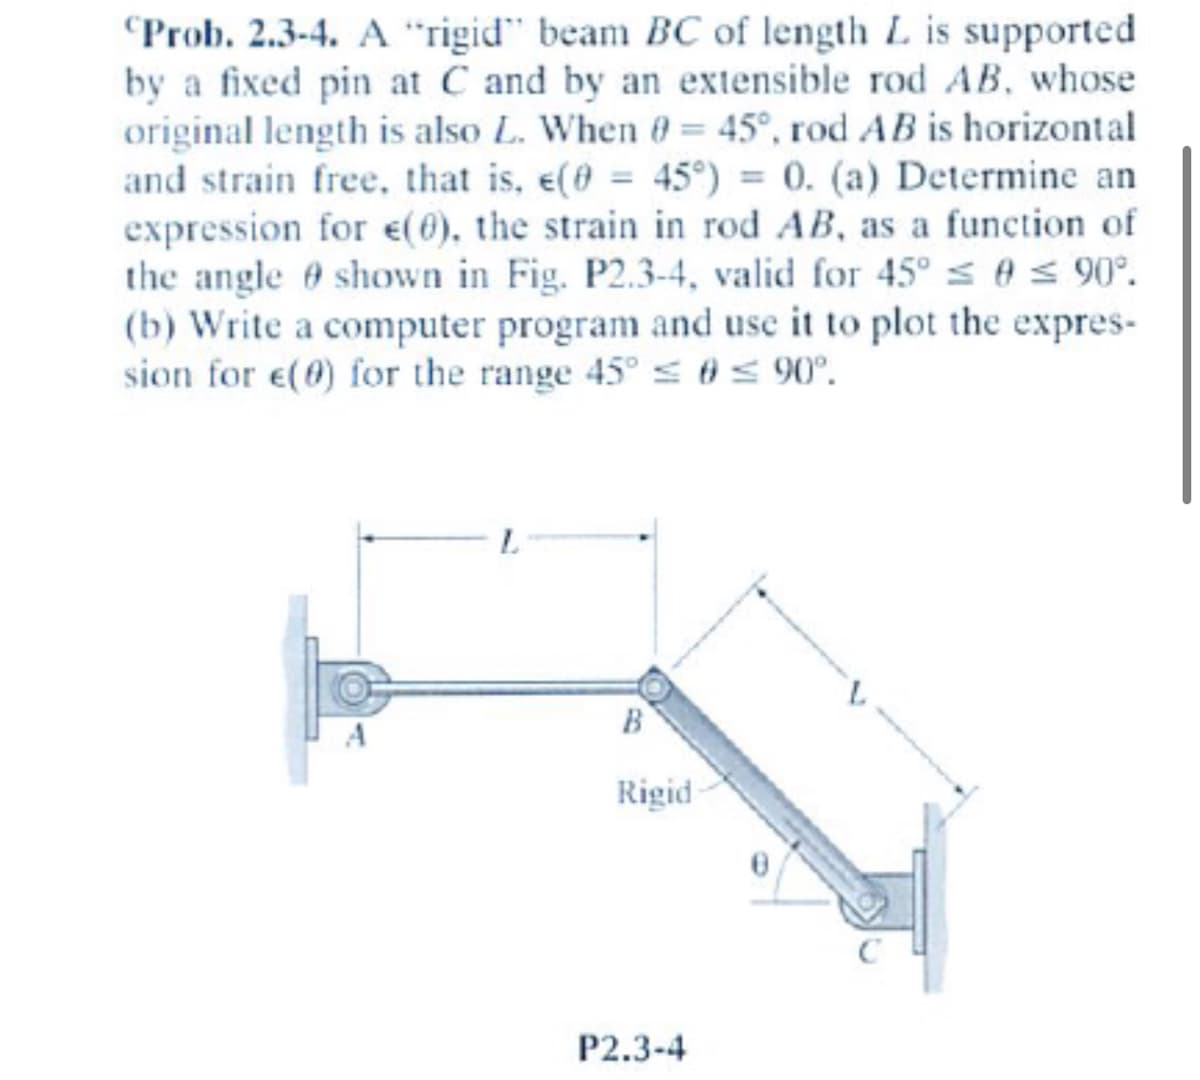 Prob. 2.3-4. A "rigid" beam BC of length L is supported
by a fixed pin at C and by an extensible rod AB, whose
original length is also L. When 0= 45°, rod AB is horizontal
and strain free, that is, e(0 = 45°) = 0. (a) Determine an
expression for e(0), the strain in rod AB, as a function of
the angle shown in Fig. P2.3-4, valid for 45° ≤ 0 ≤ 90°.
(b) Write a computer program and use it to plot the expres-
sion for e(0) for the range 45° ≤ 0 ≤ 90°.
B
Rigid
P2.3-4
0